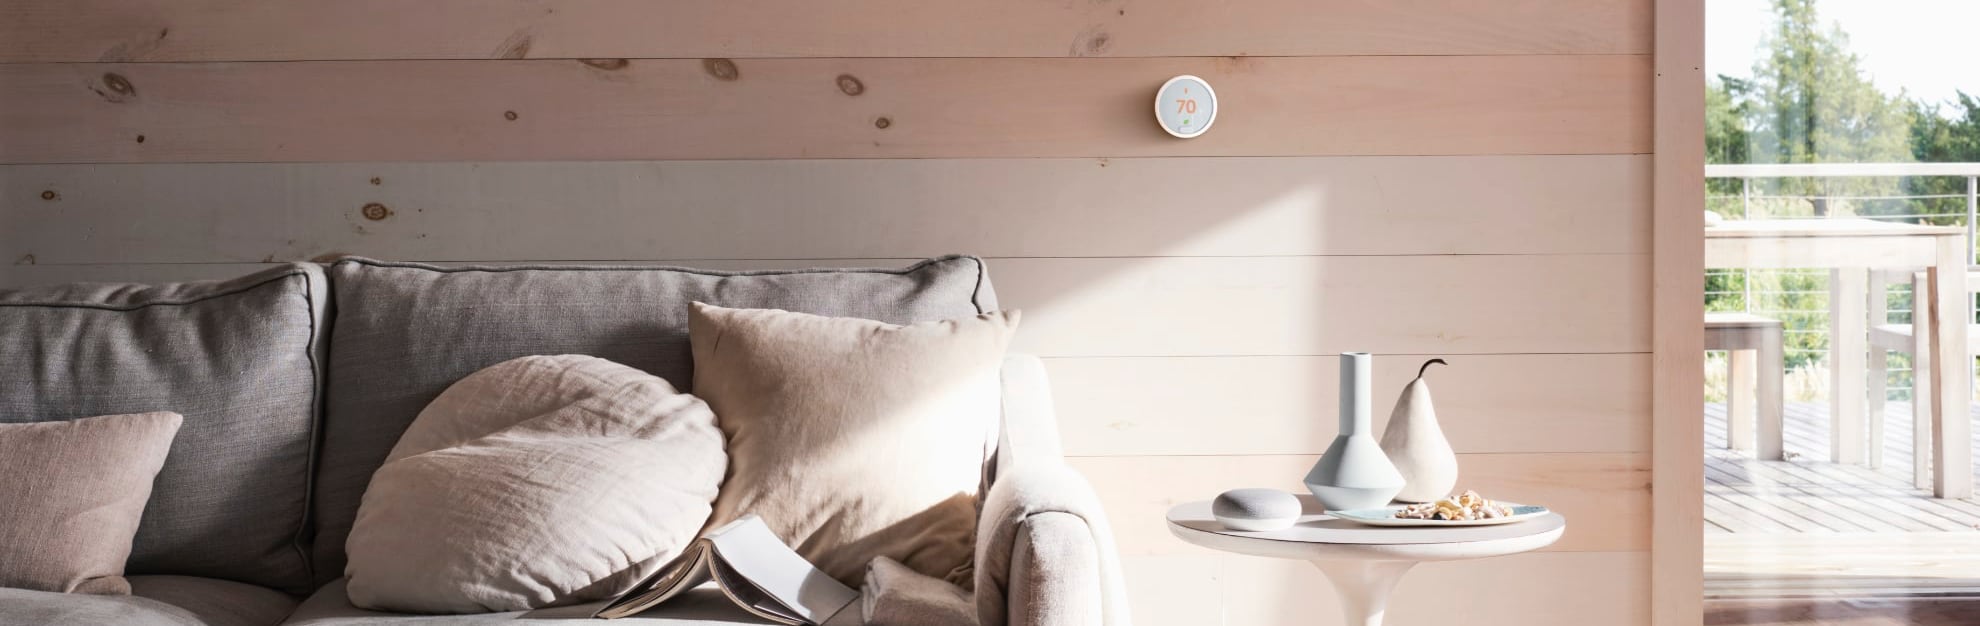 Vivint Home Automation in Lincoln